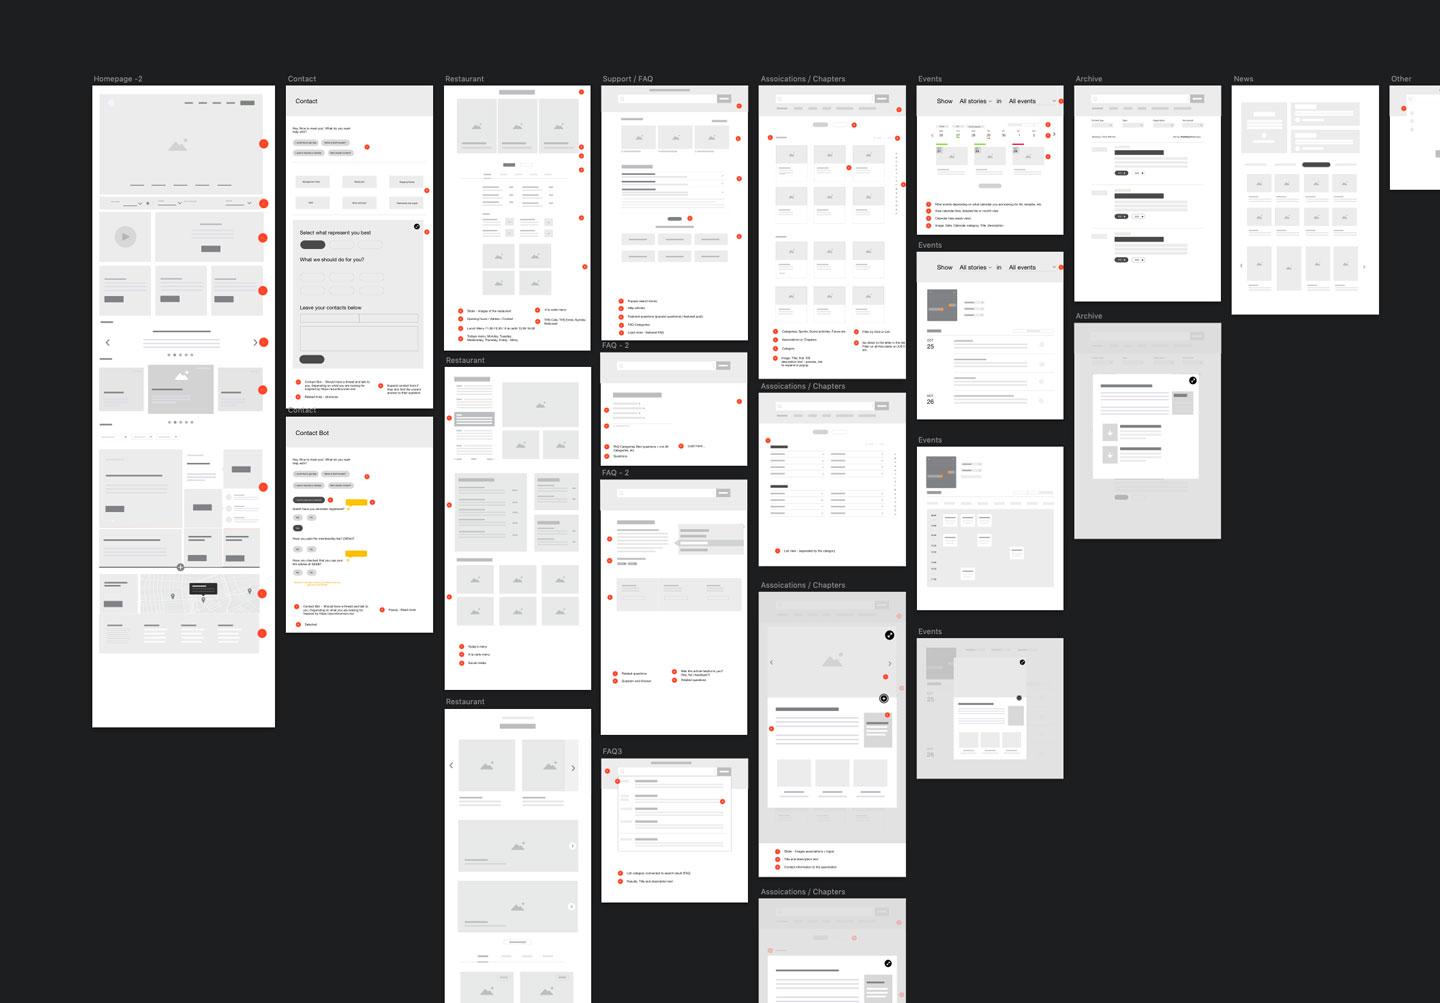 A collection of user interface designs for a mobile application, arranged in a grid against a dark background.